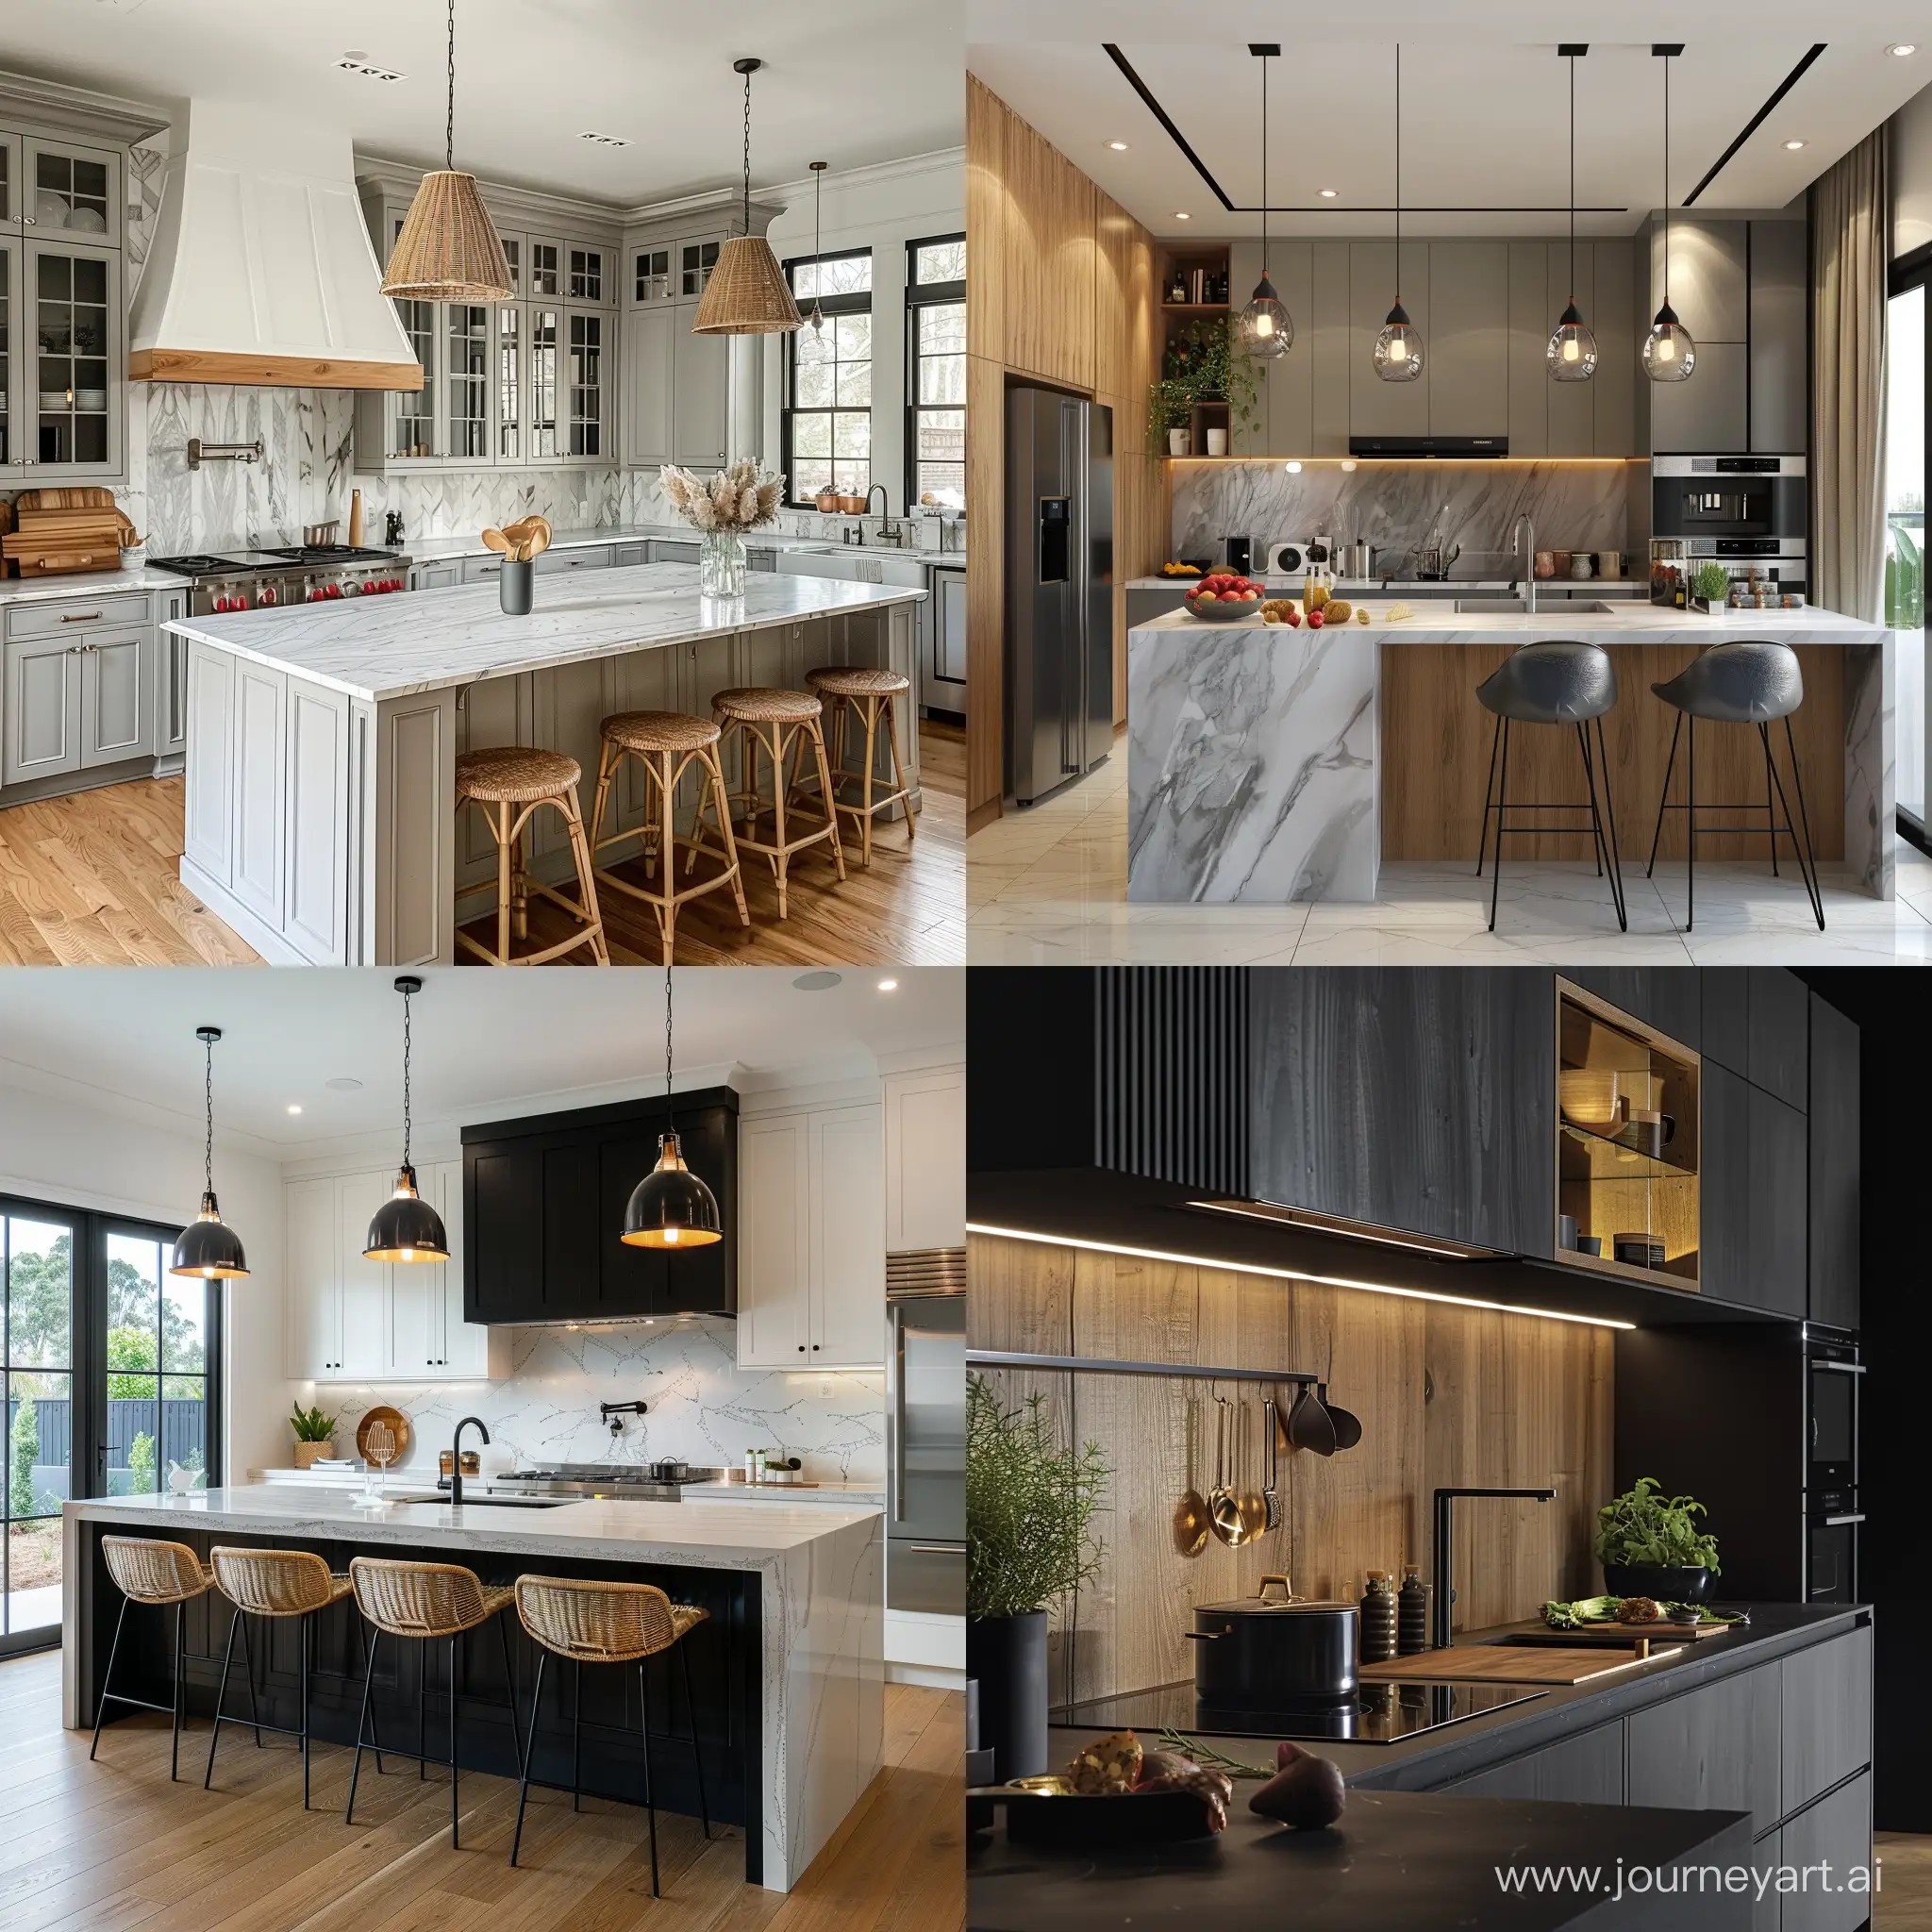 Vibrant-Kitchen-Scene-with-Modern-Appliances-and-Cooking-Utensils